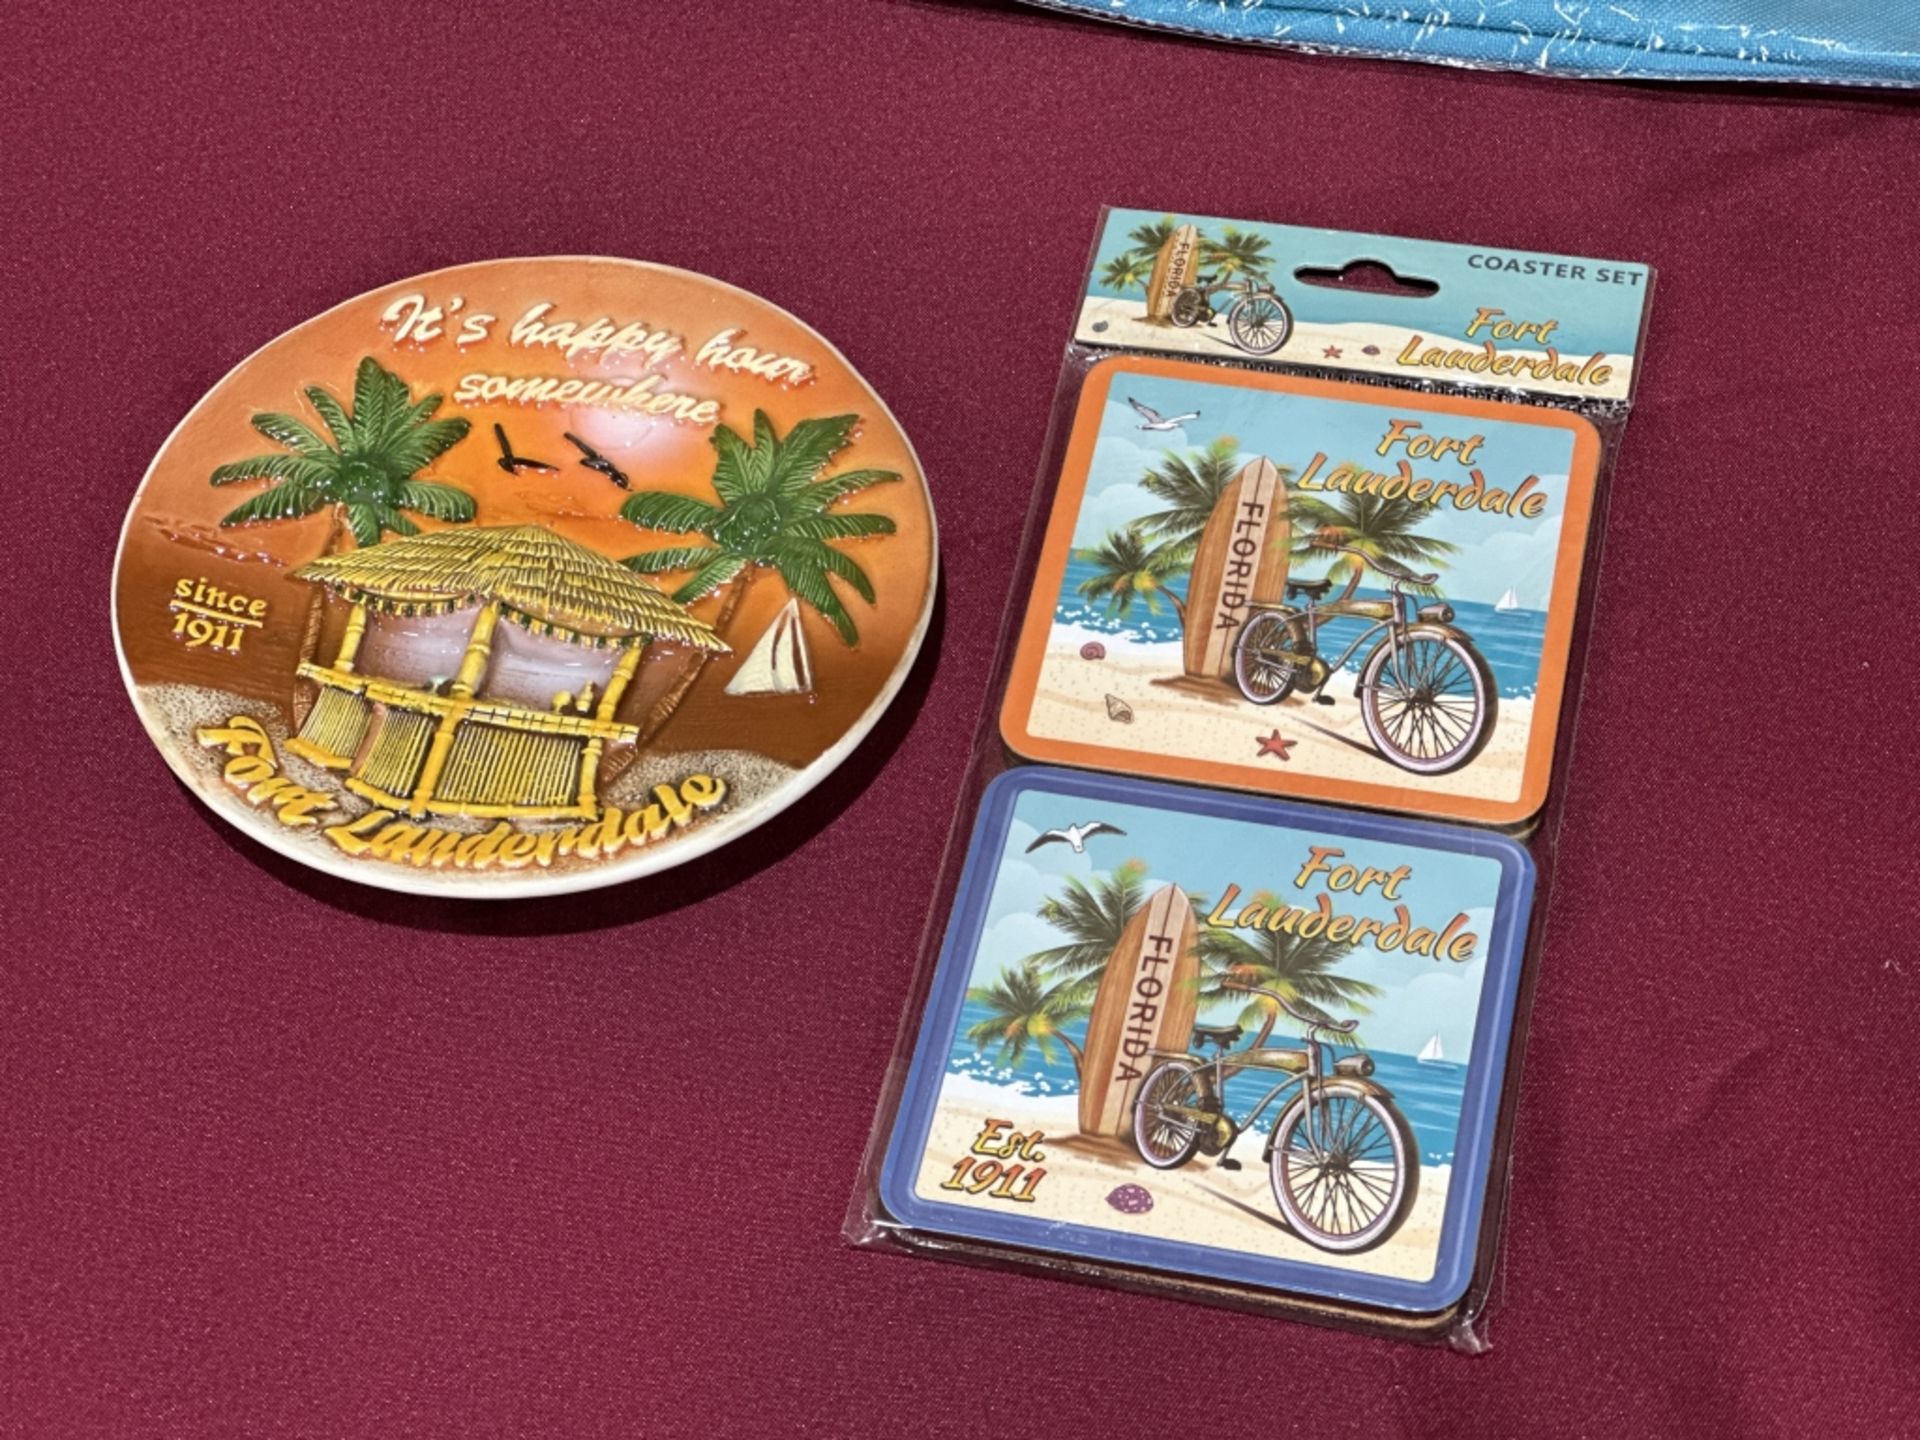 LOT CONSISTING OF ASSORTED BEACH-THEMED SOUVENIRS - Image 2 of 10